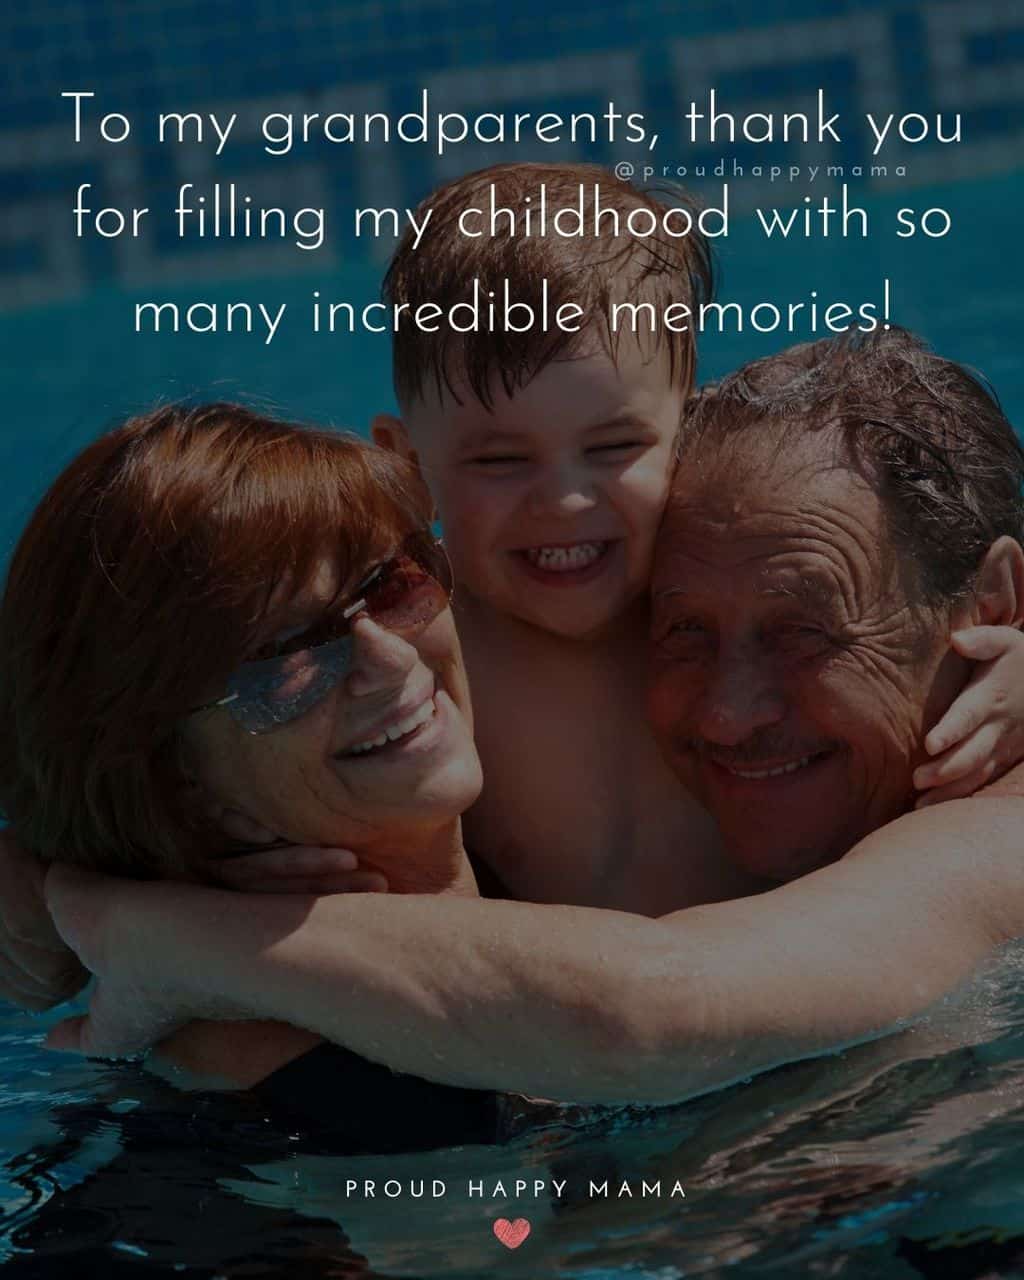 Grandparent Quotes – To my grandparents, thank you for filling my childhood with so many incredible memories!’